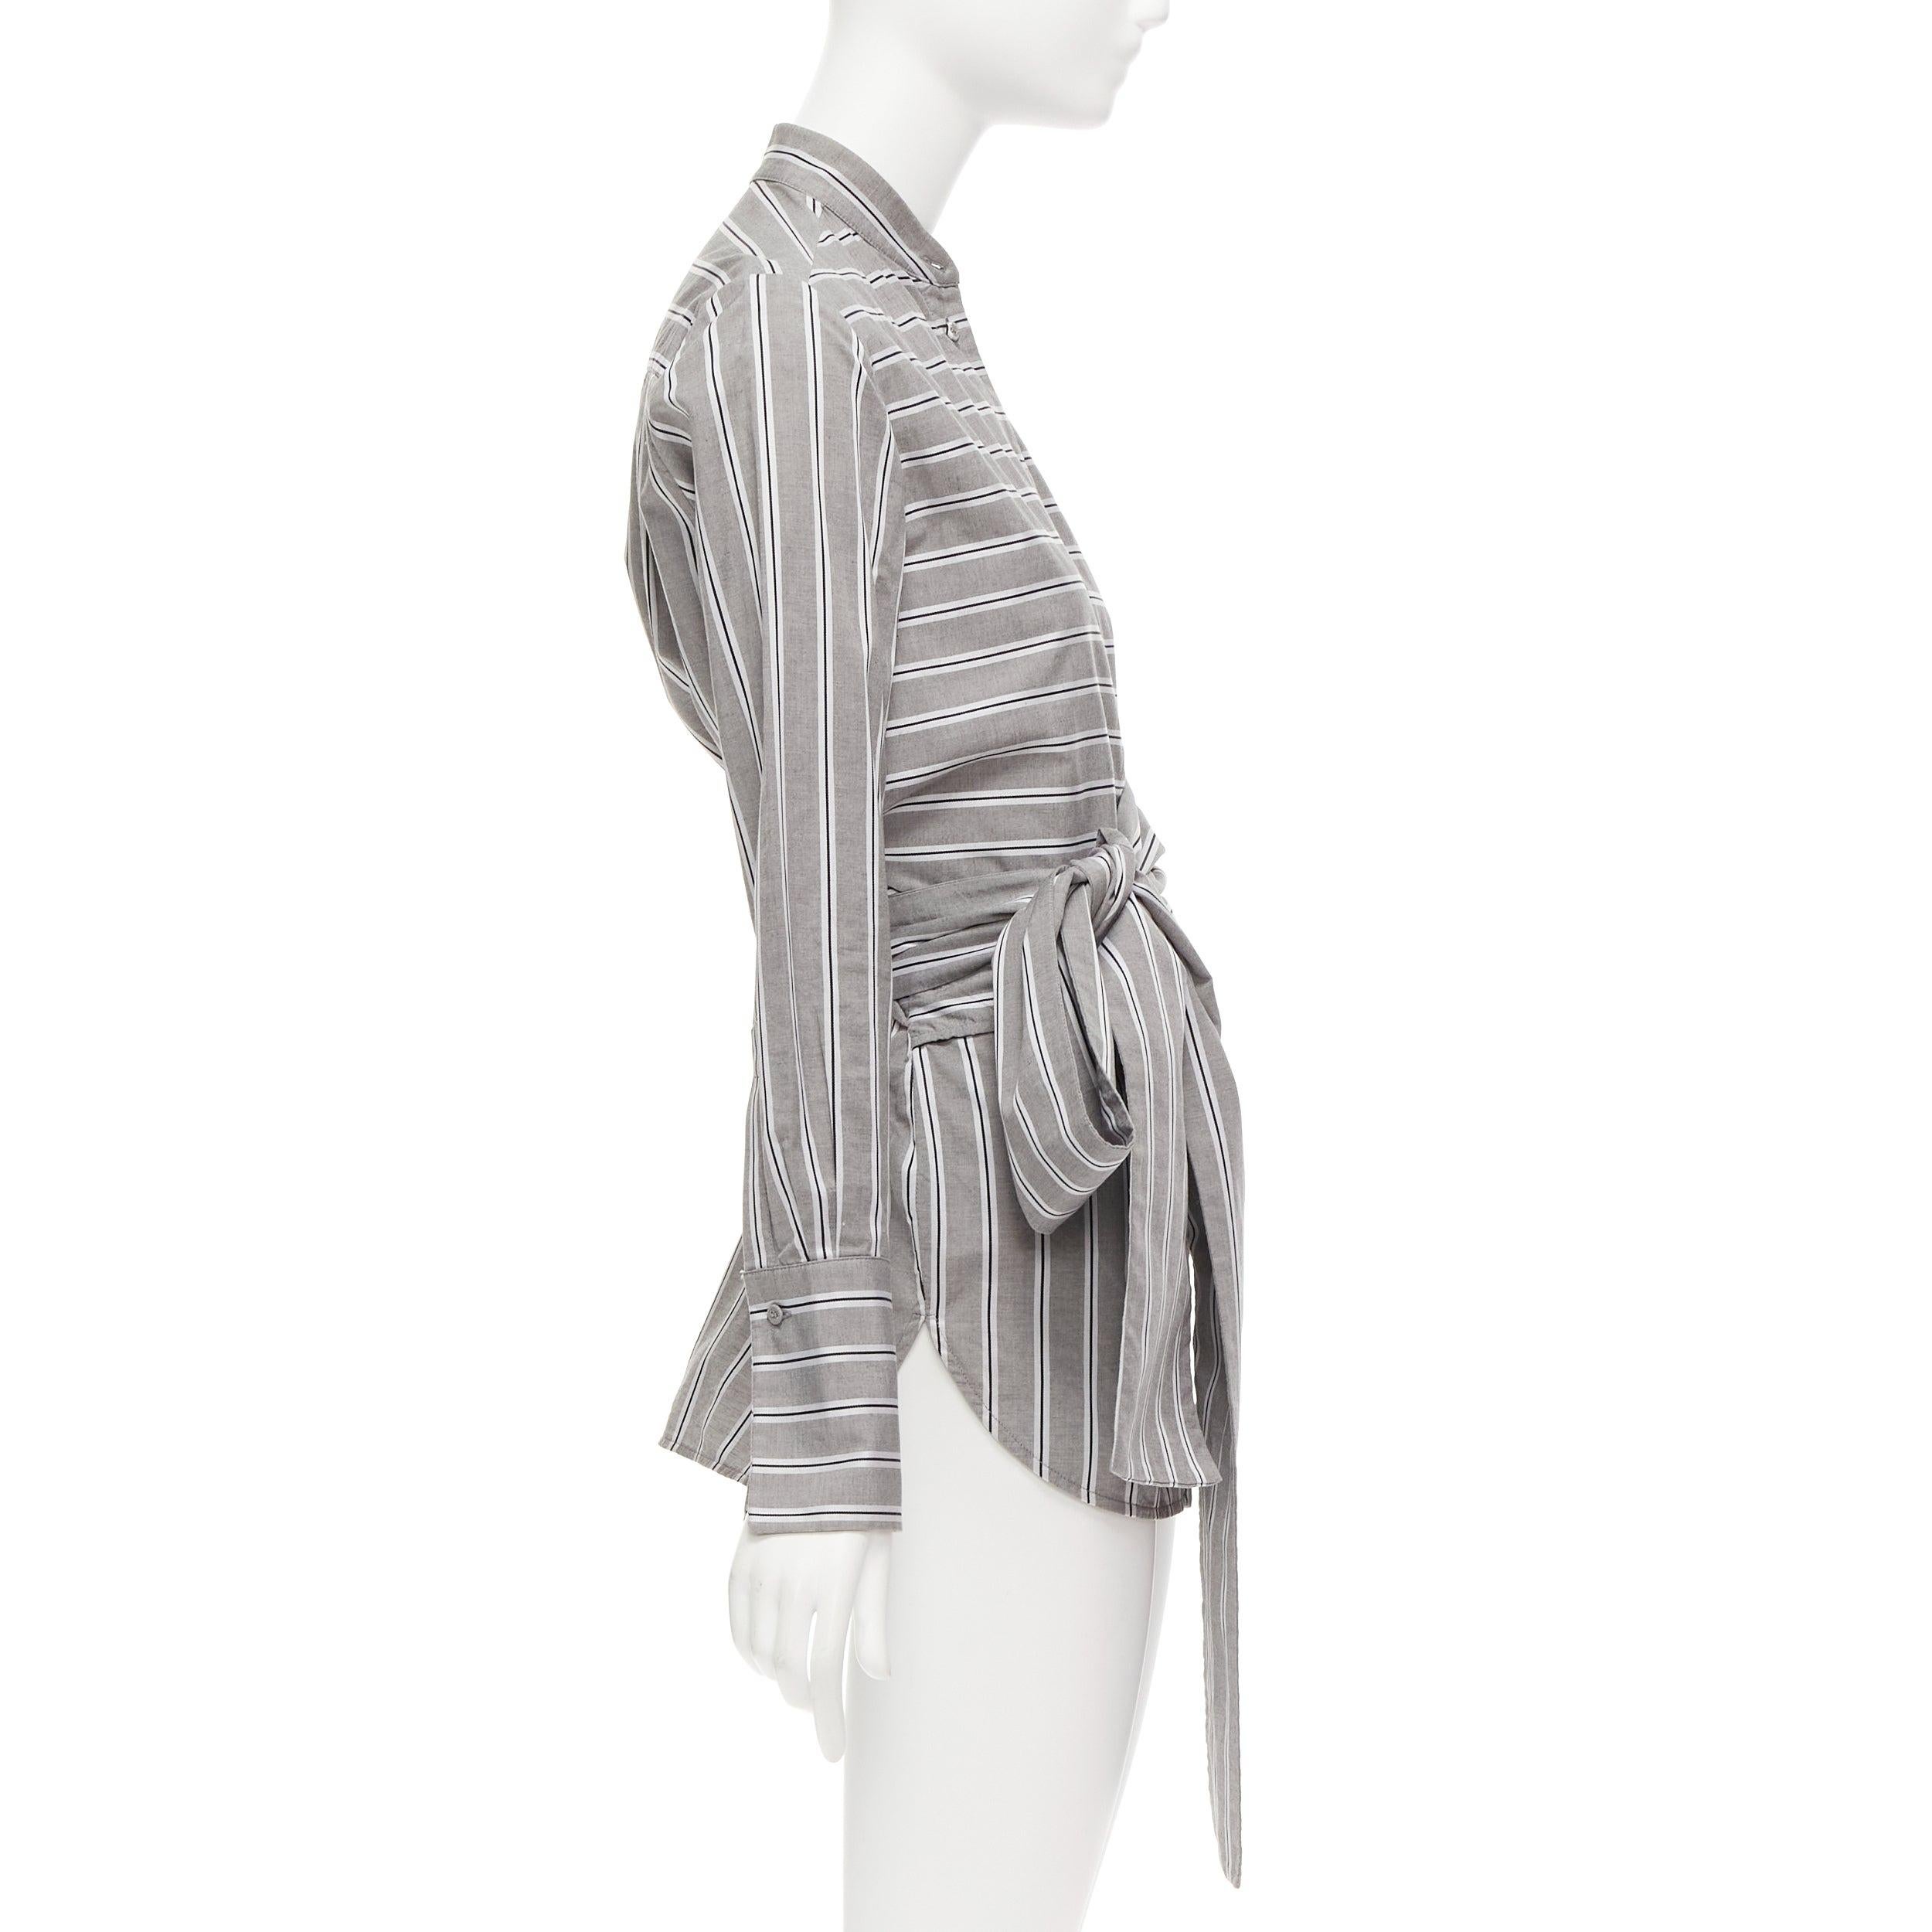 VVB VICTORIA BECKHAM grey striped cotton oversized sash belt tunic shirt UK6 XS In Fair Condition For Sale In Hong Kong, NT